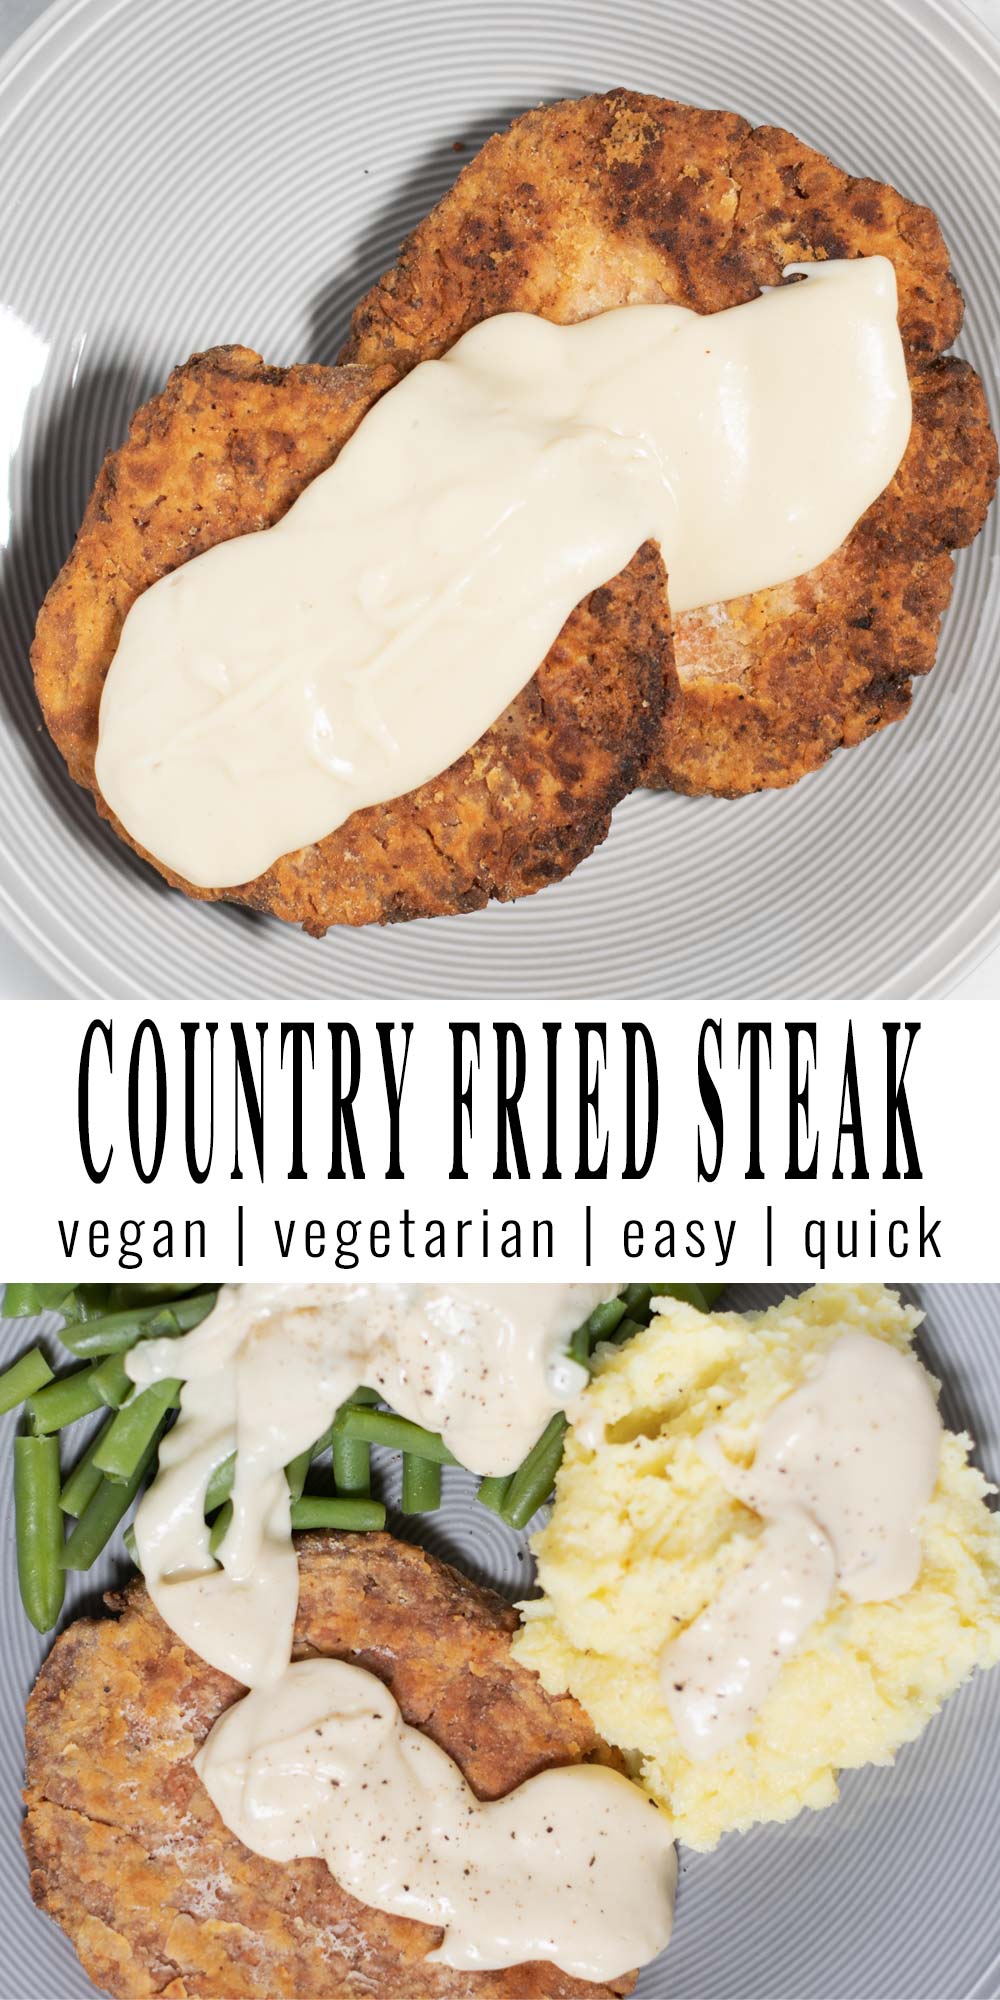 Collage of two pictures of the Country Fried Steak with recipe title text.